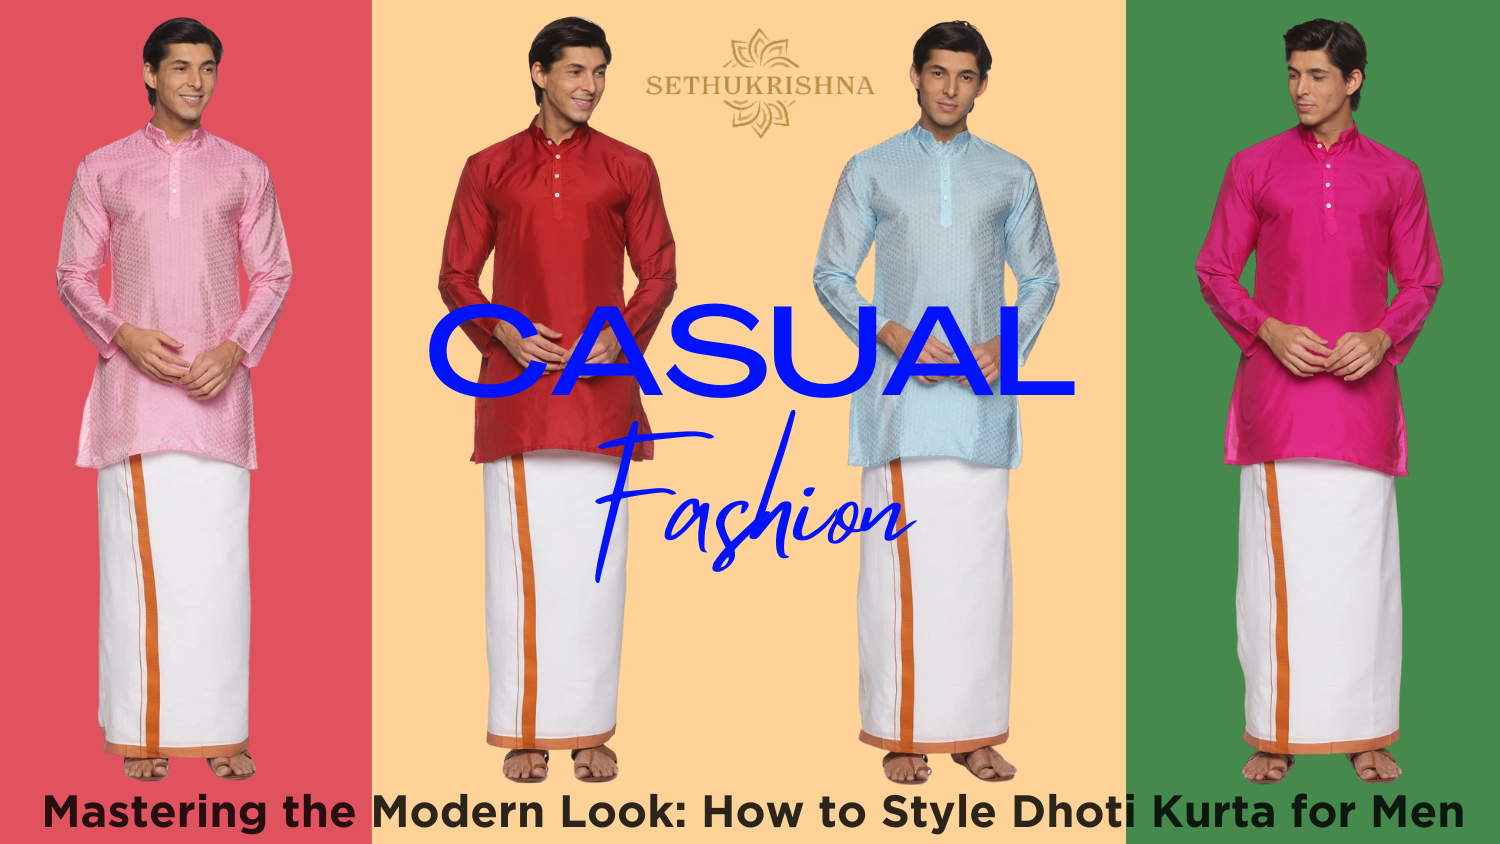 Mastering the Modern Look: How to Style Dhoti Kurta for Men